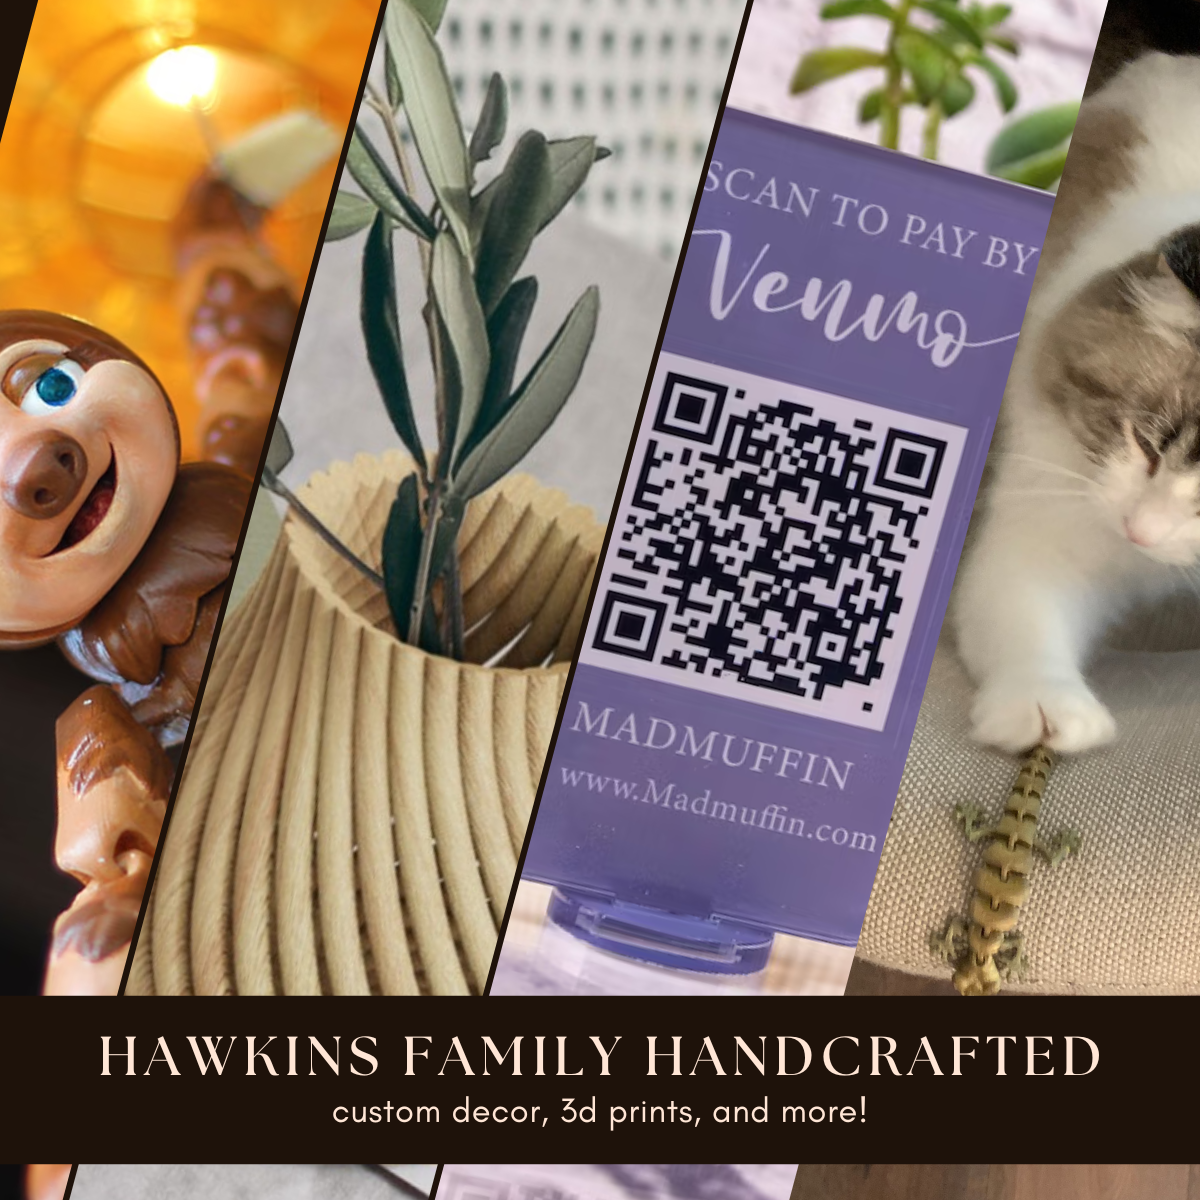 Square Hawkins Woodshop Custom Decor 3d Prints And More Category Image